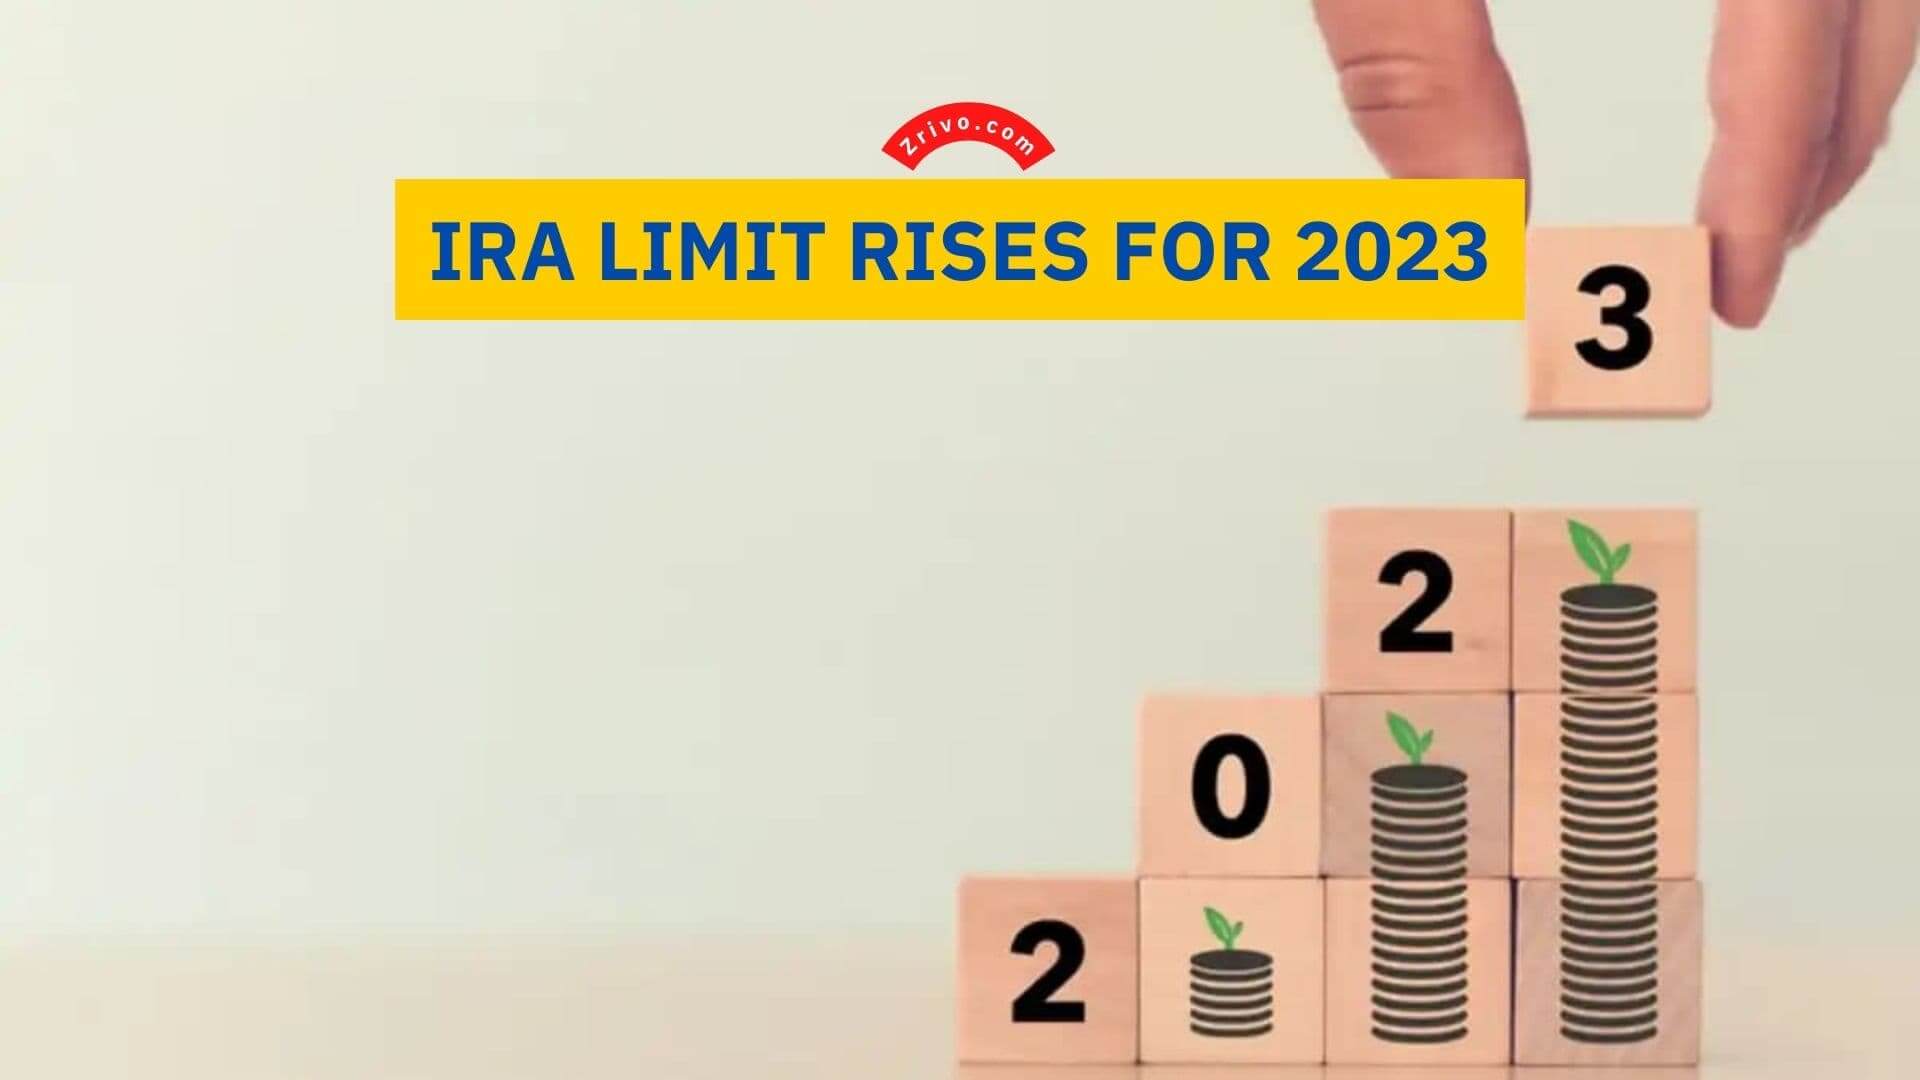 IRA-Limit-Rises-For-2023-Zrivo-Cover-1